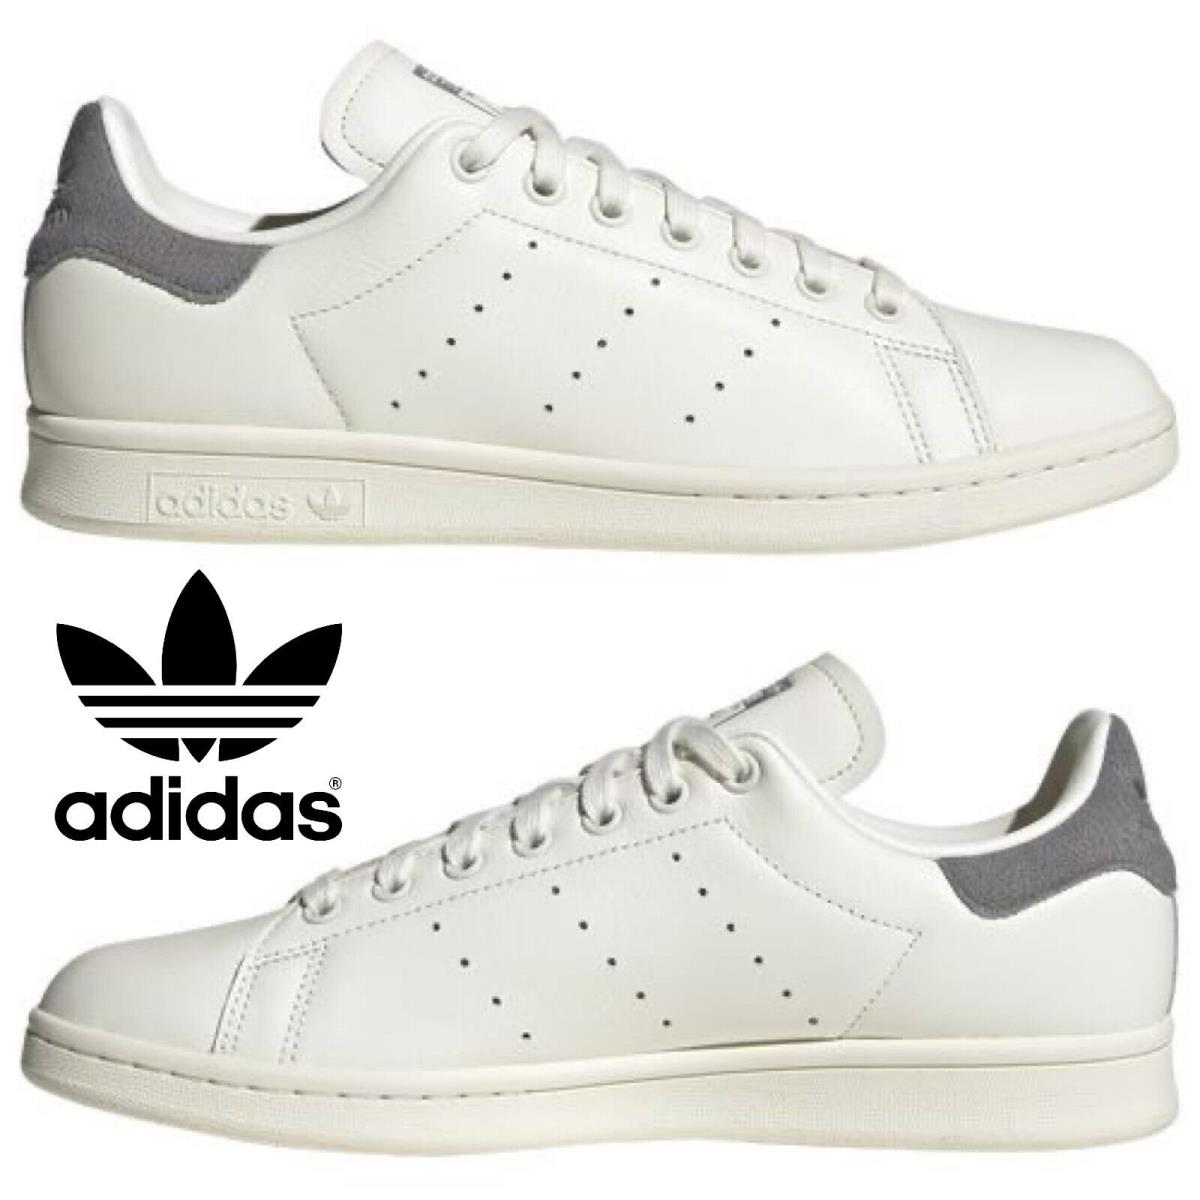 Adidas Originals Stan Smith Men`s Sneakers Comfort Sport Casual Shoes Gray White